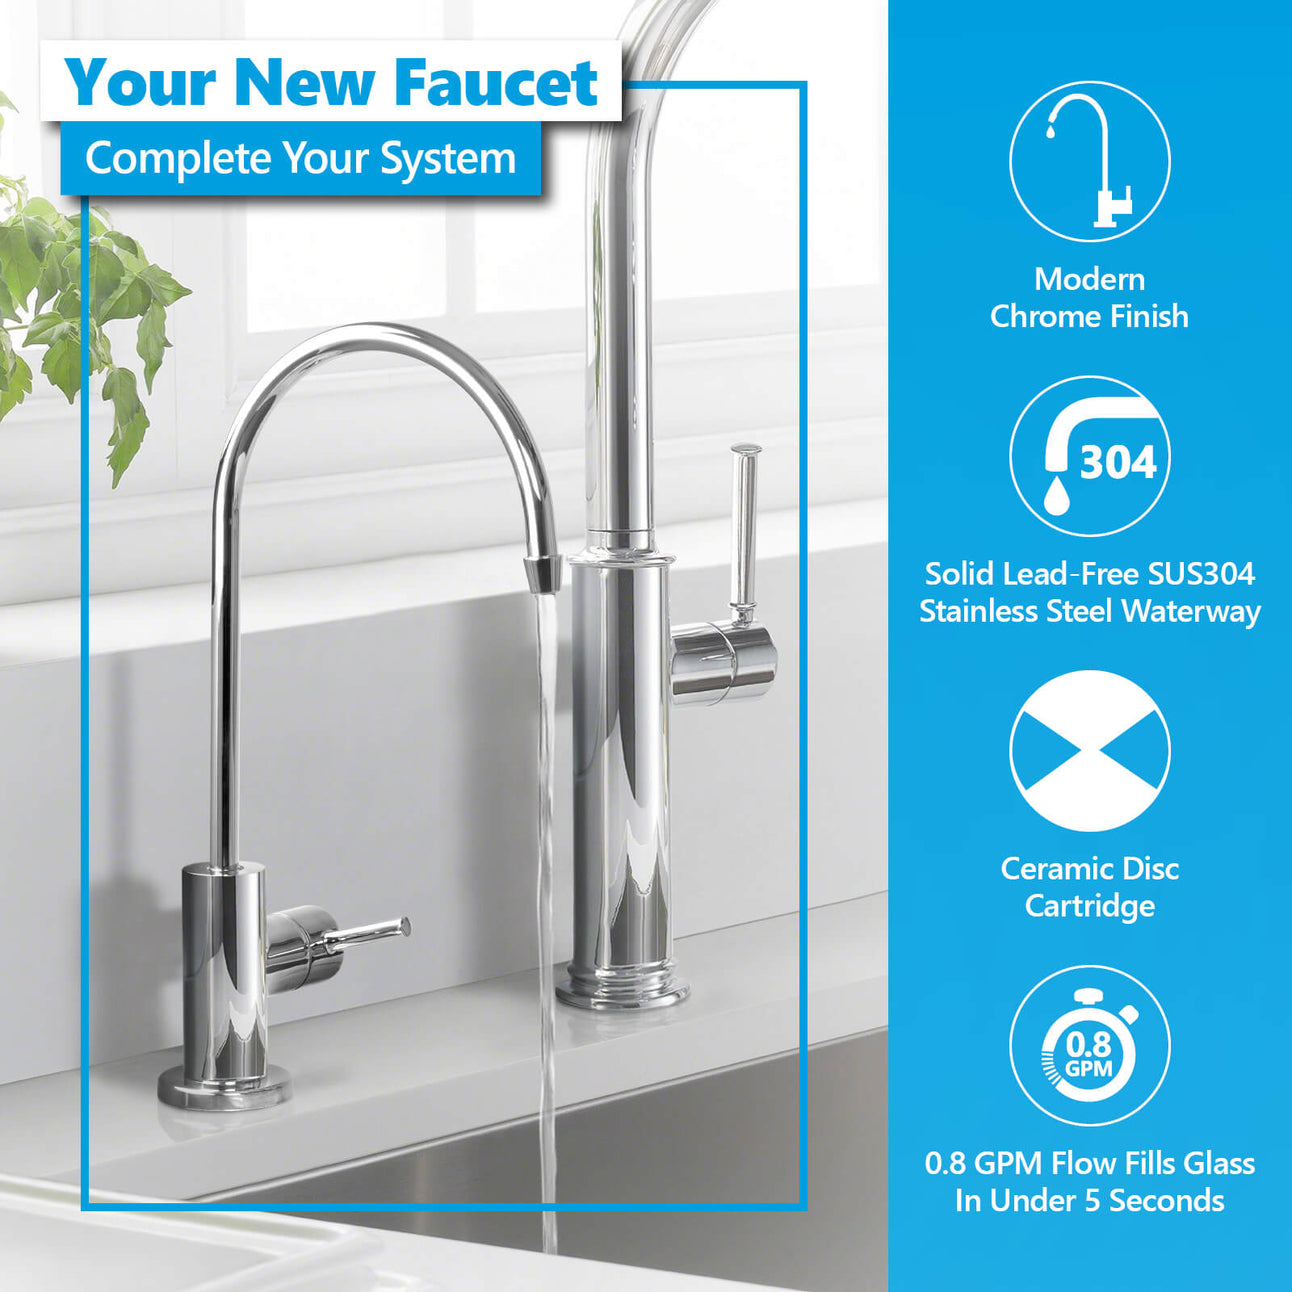 Express Water Modern Water Filter Faucet – Chrome – Drinking Water Faucet – Reverse Osmosis Filtration System and Kitchen Sink Beverage Faucet